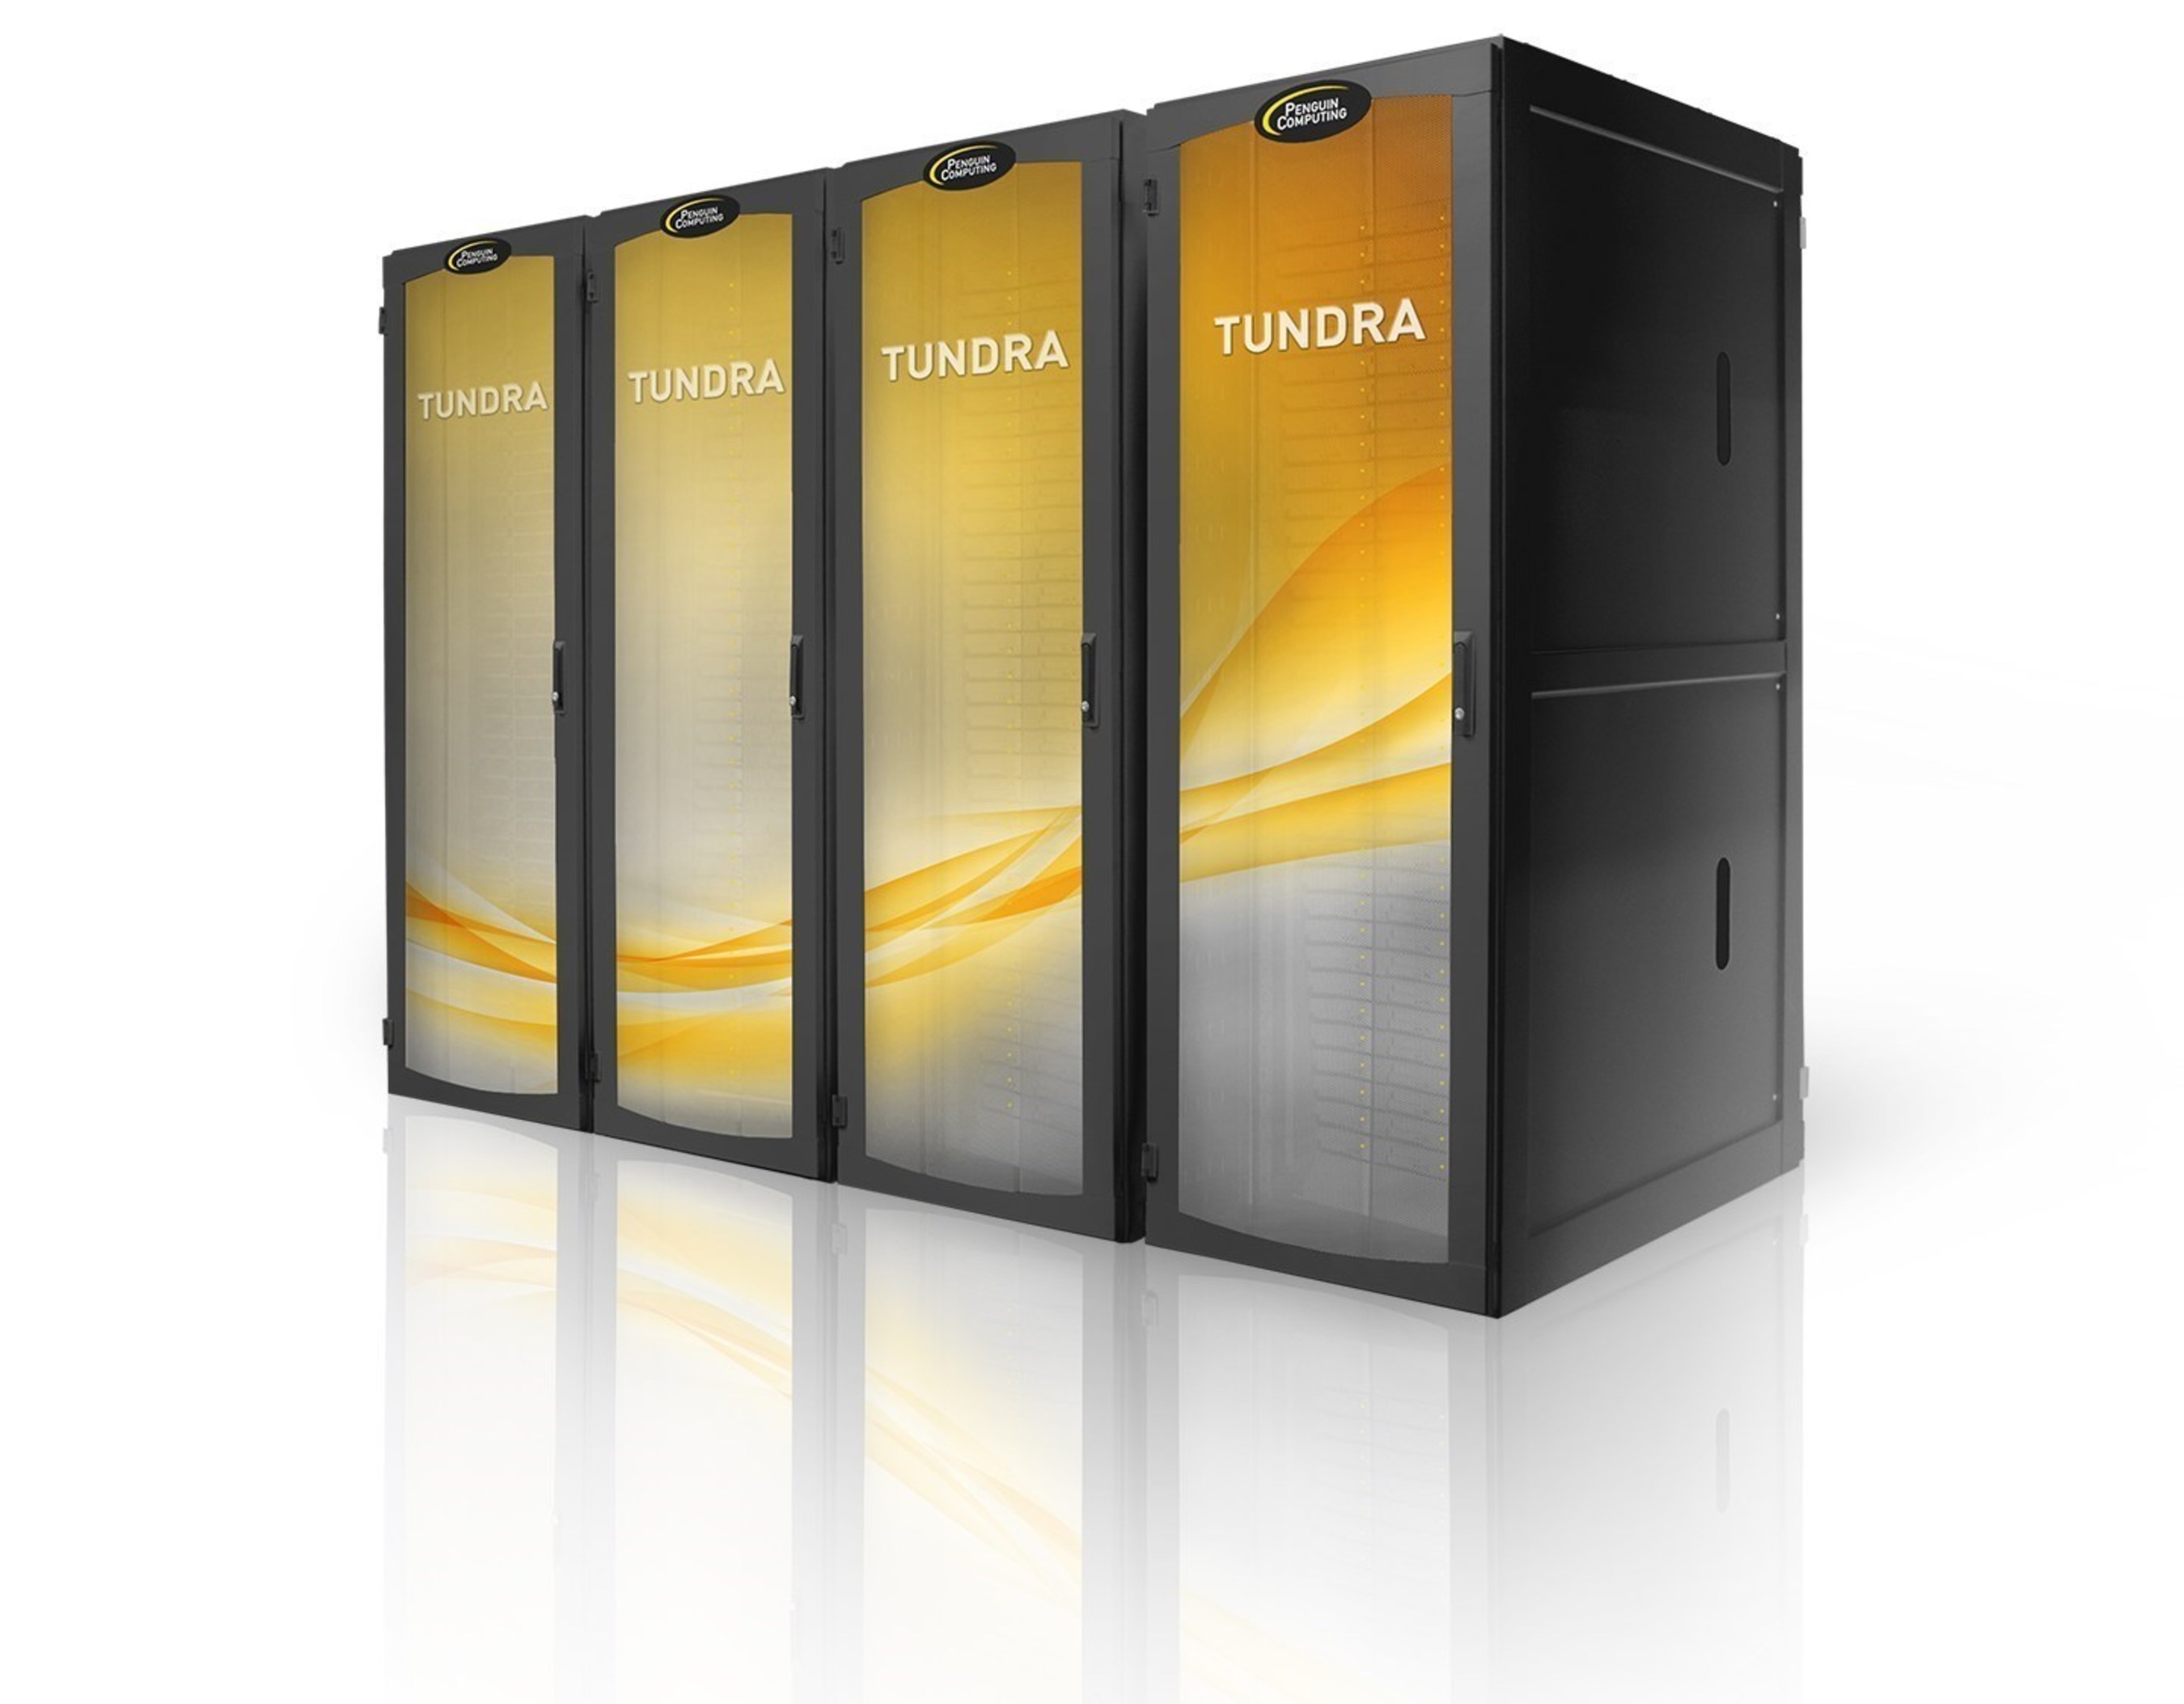 Penguin Computing's Tundra Extreme Scale Series provides density, serviceability, reliability and optimized total cost of ownership for highly-demanding computing requirements